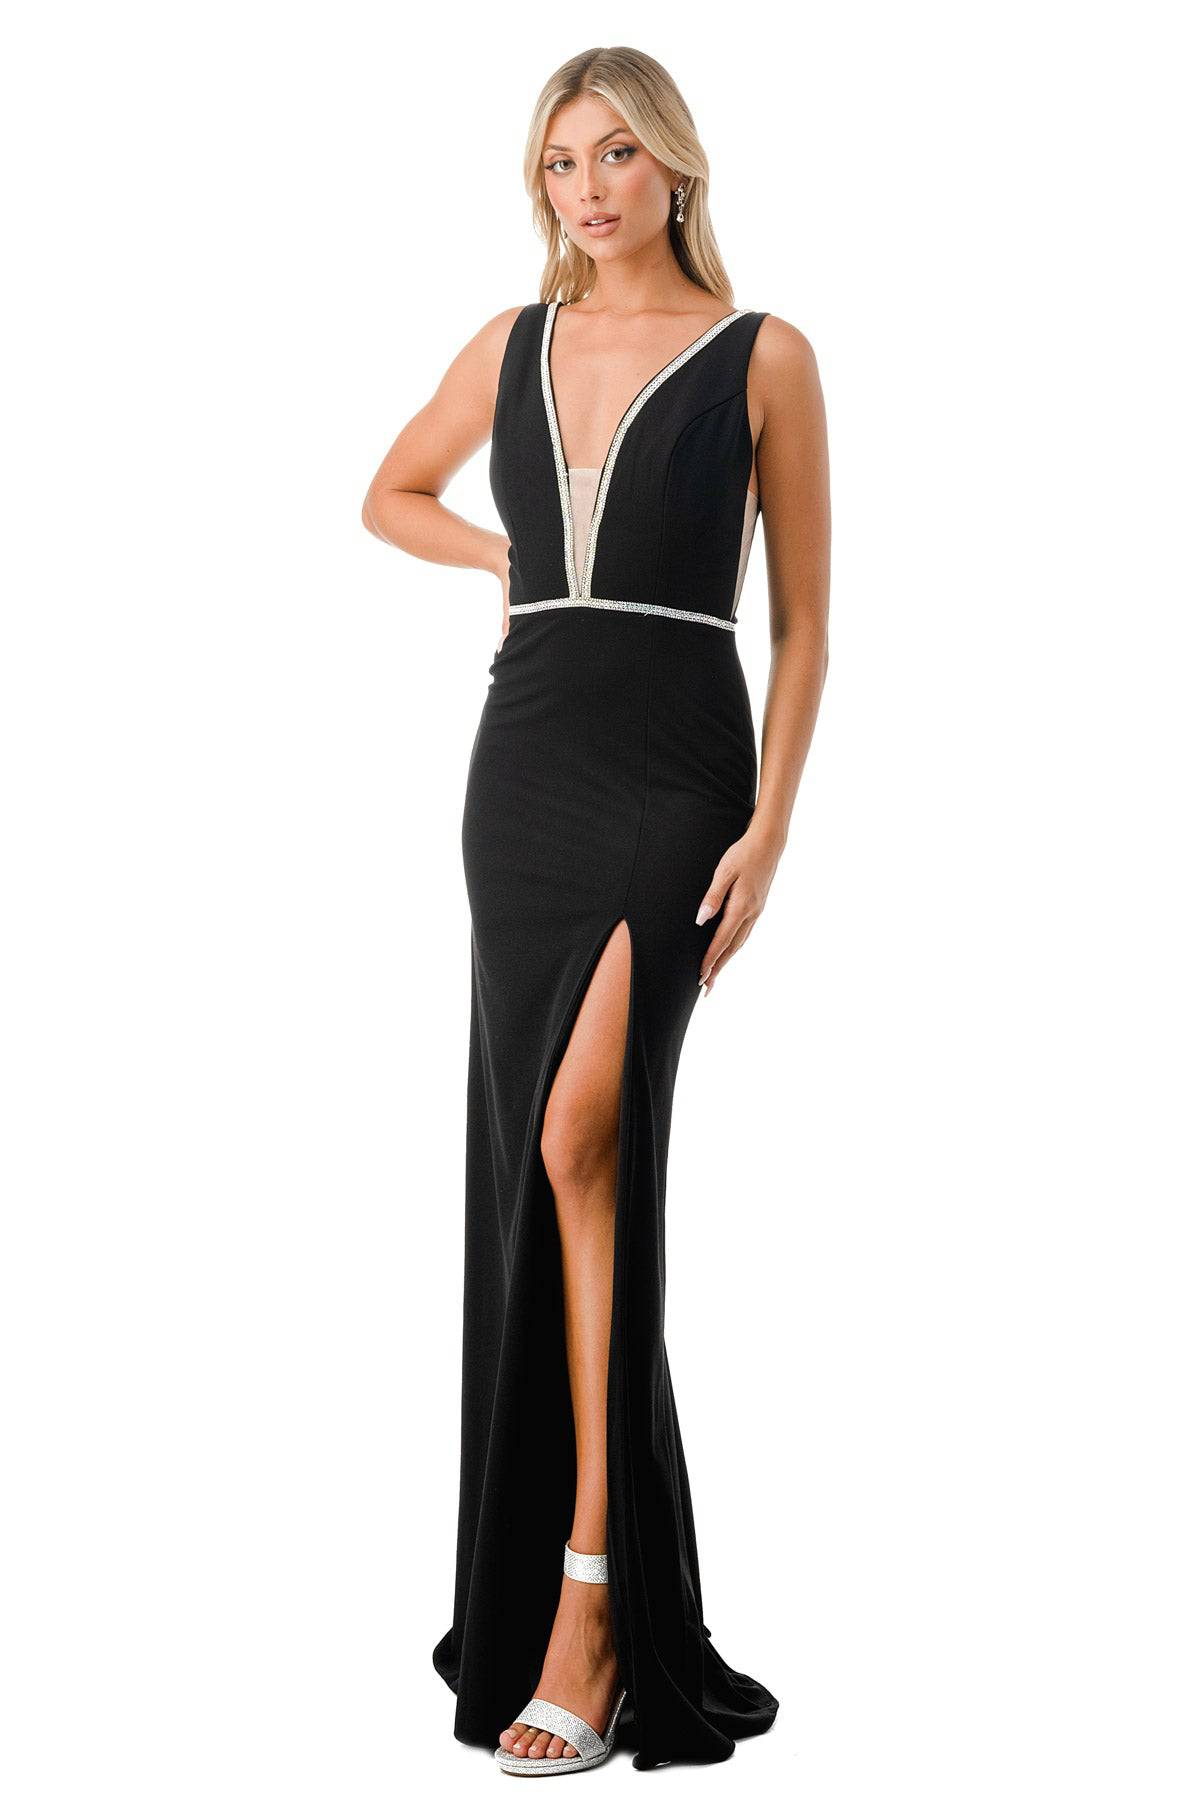 Aspeed Design D499 Crystal Embroidered Low Neck Slit Leg Dress - NORMA REED